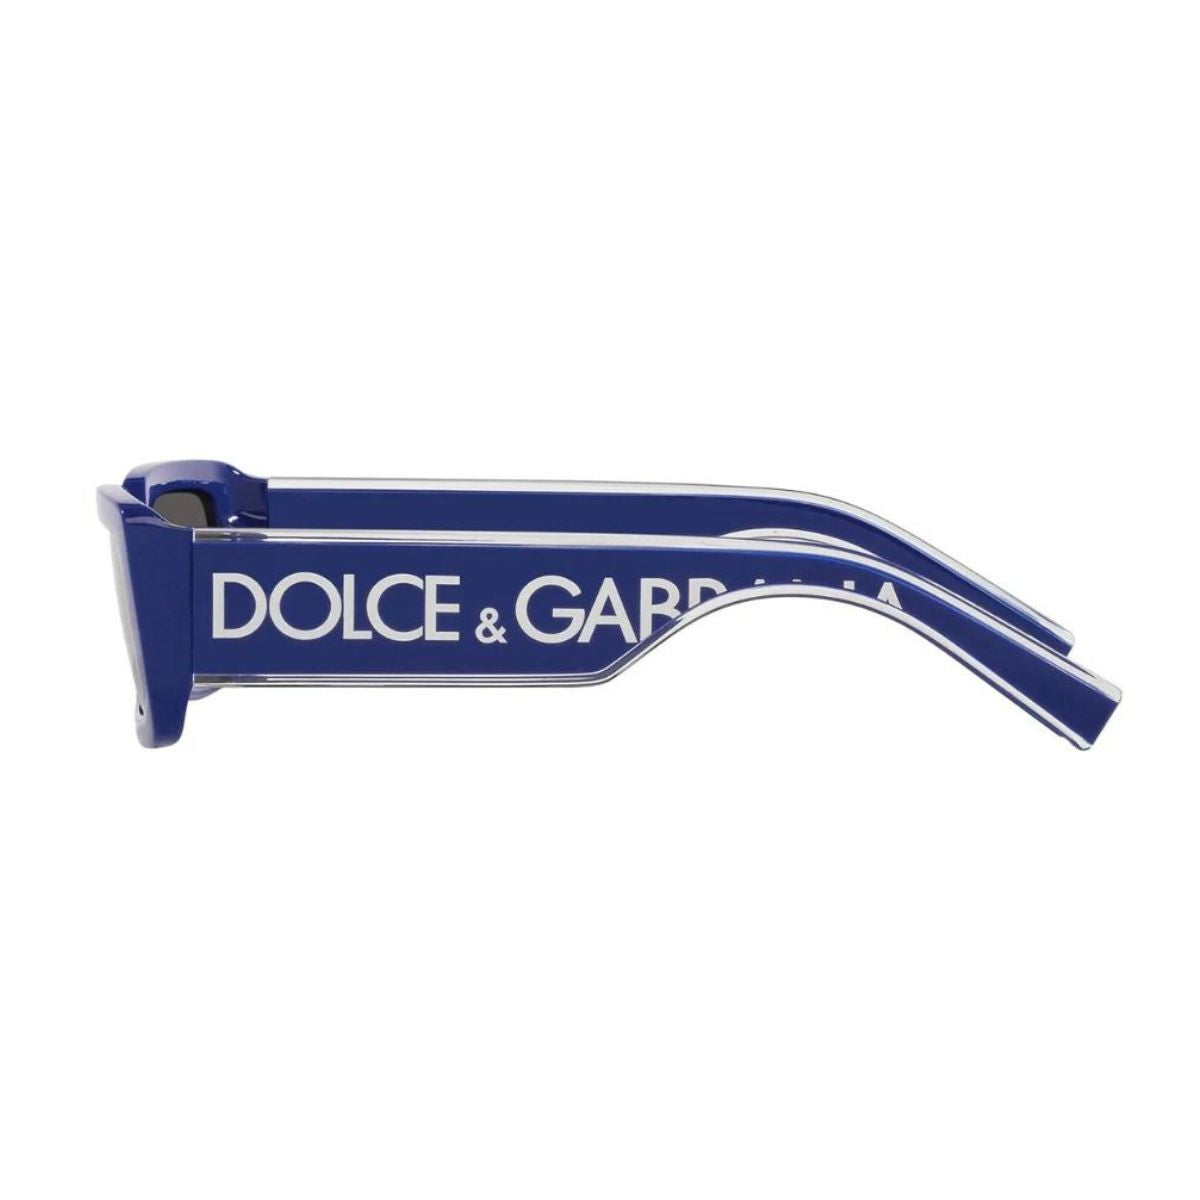 " Fashionable blue and white Dolce & Gabbana DG6187 3094/87 sunglasses with UV protection, rectangle frame."